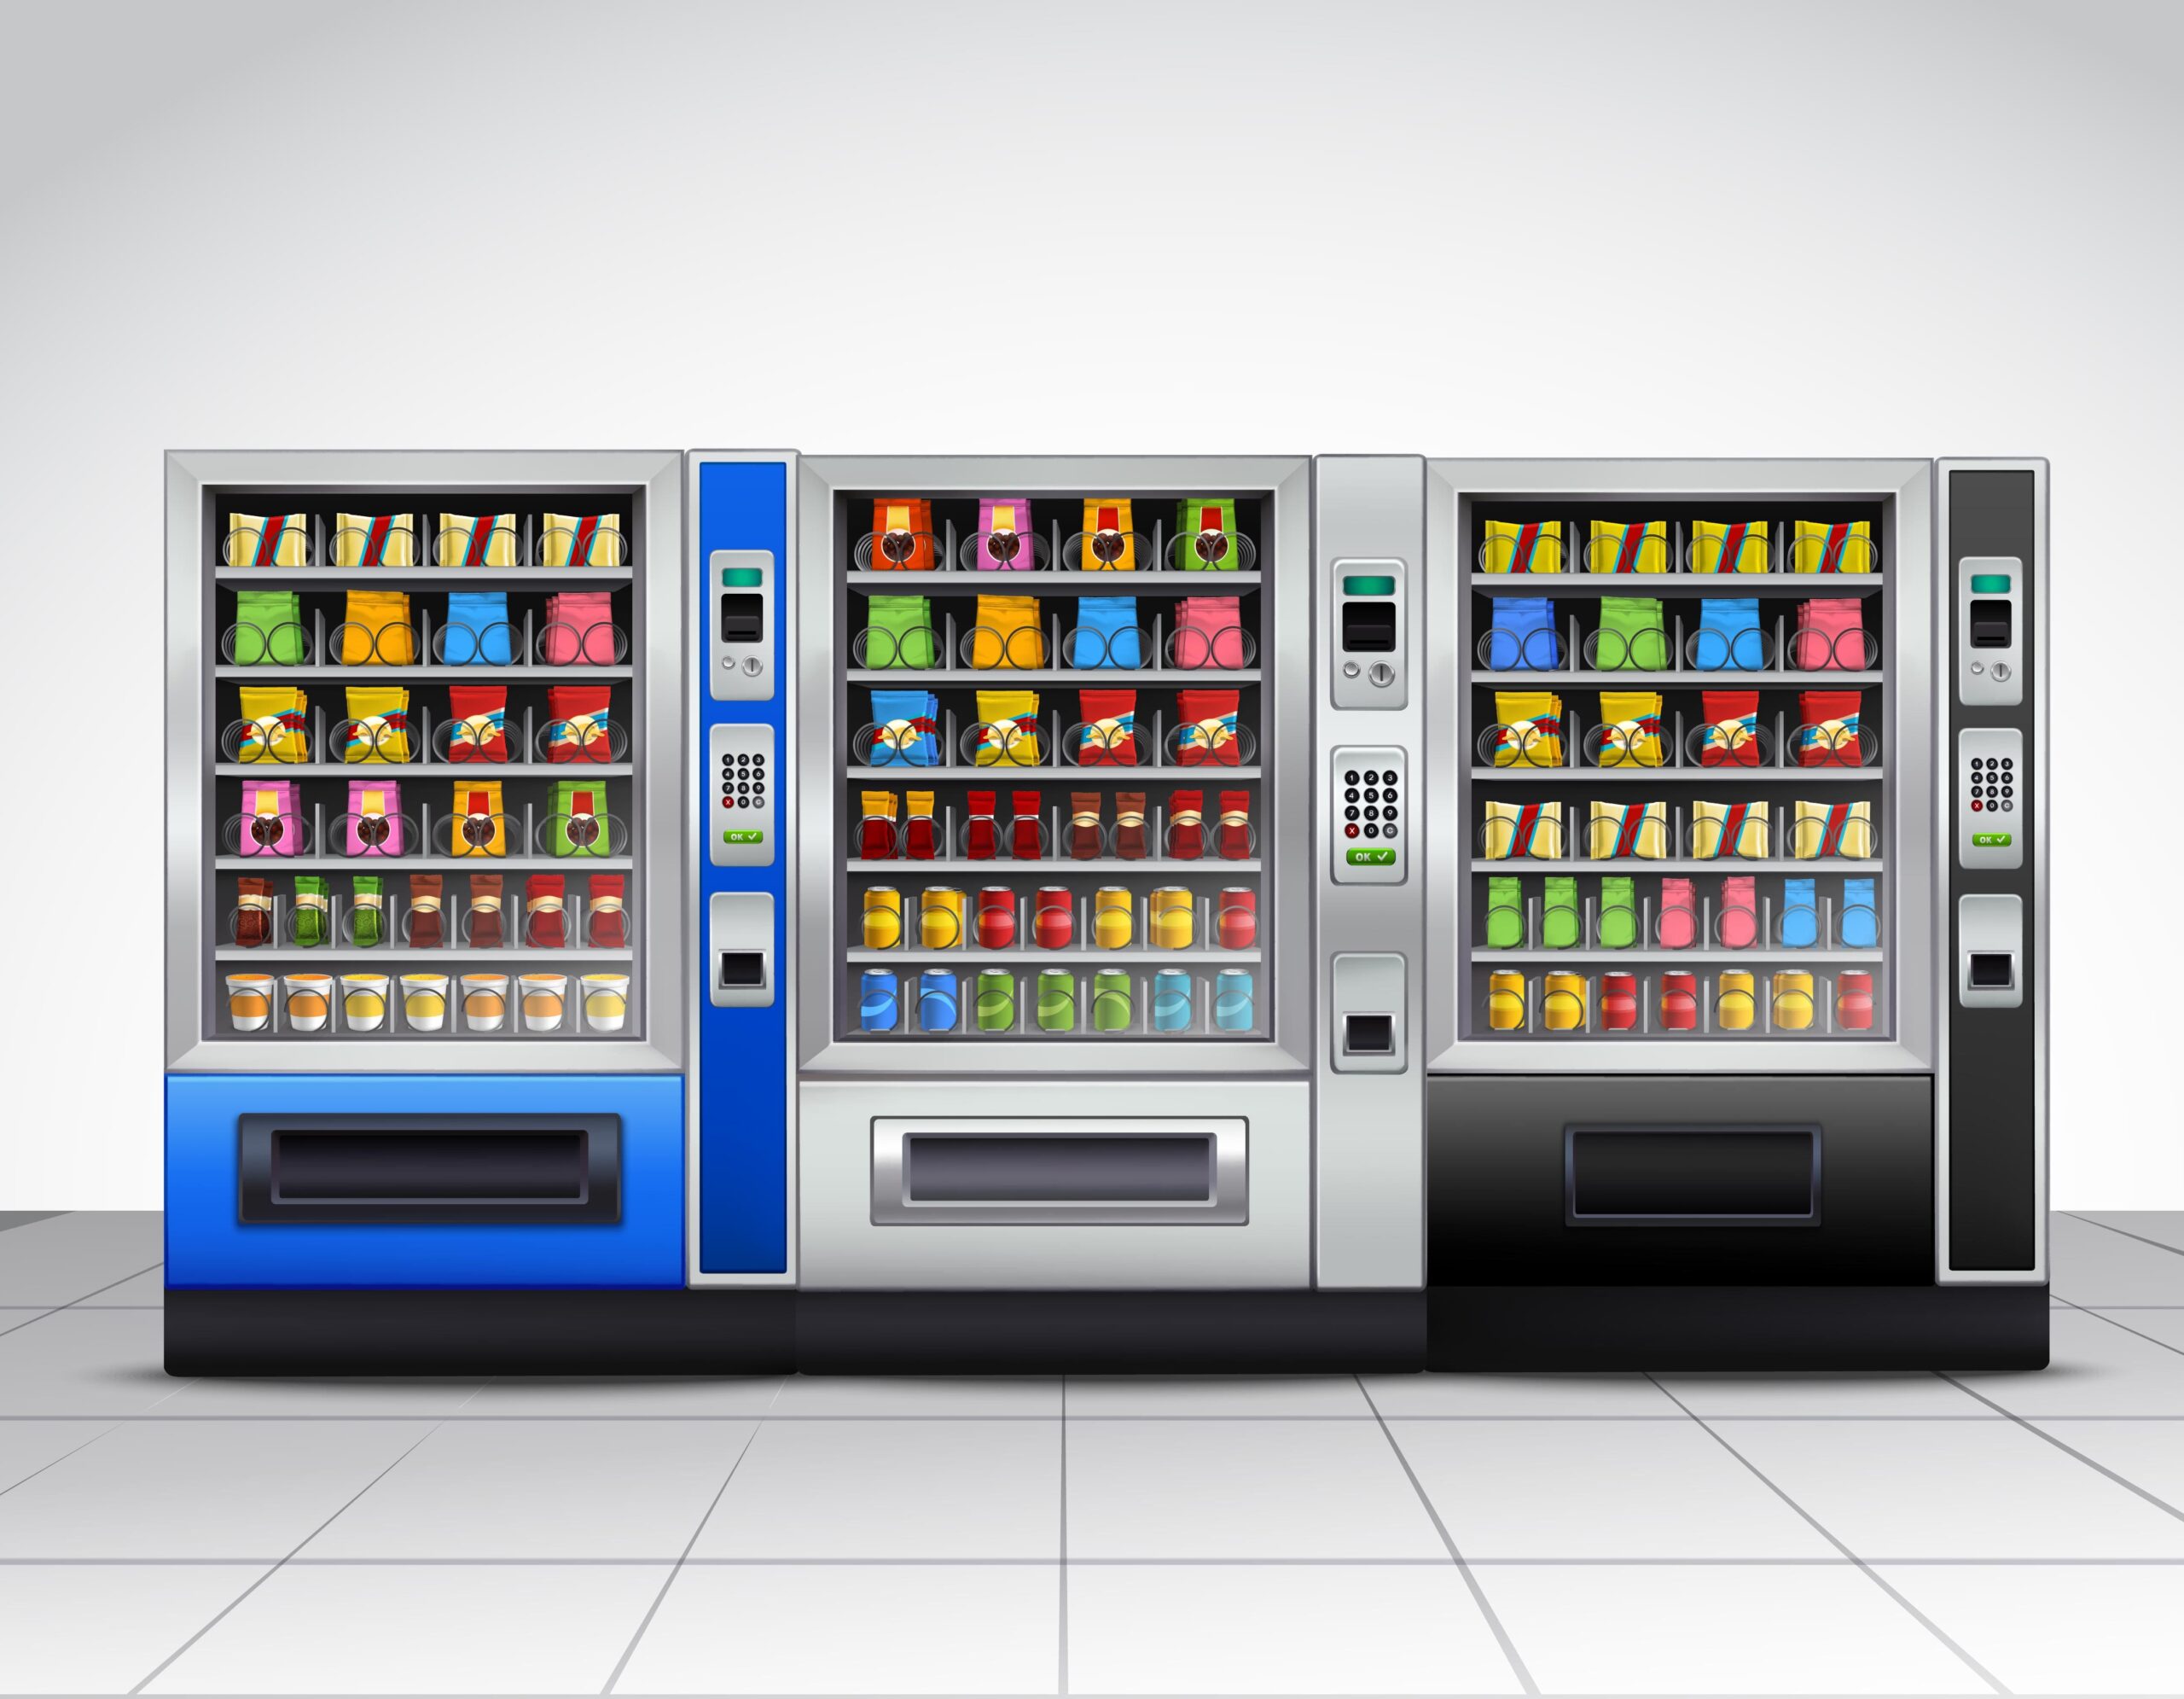 How to choose the best vending machine for my place